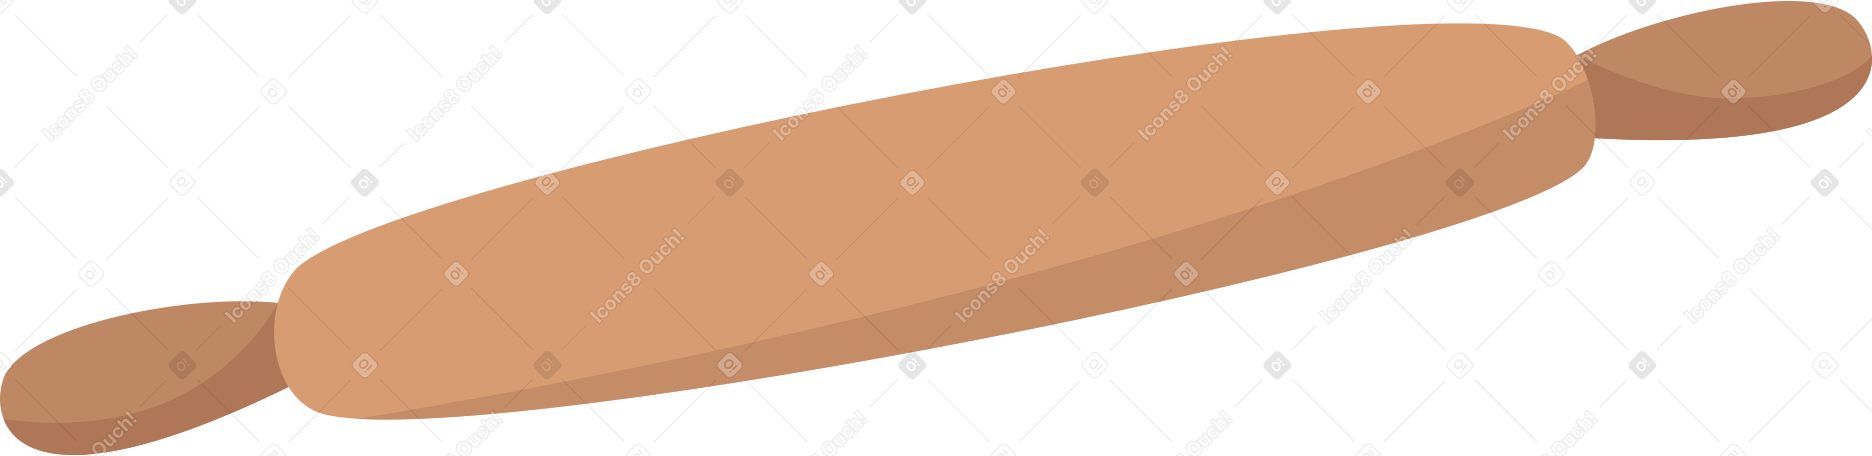 wooden rolling pin Illustration in PNG, SVG